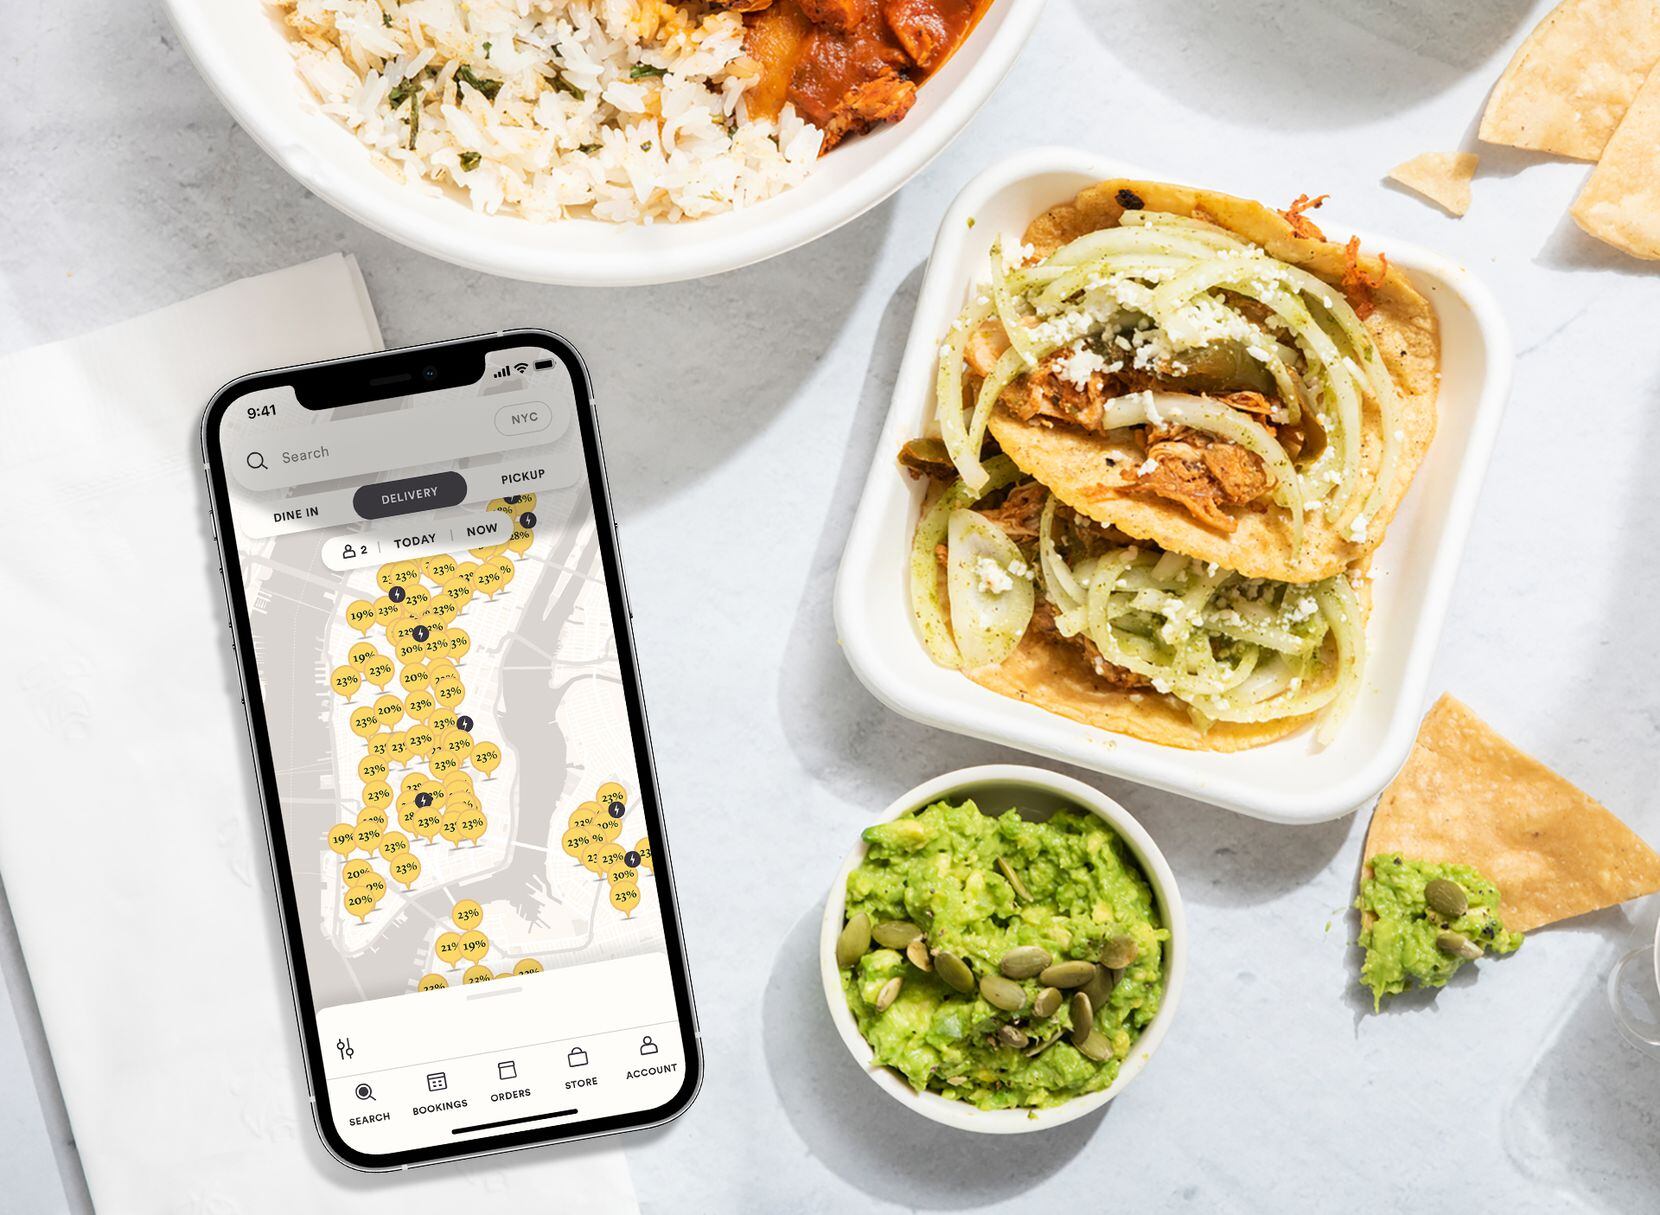 The Seated app pays you for dining out.